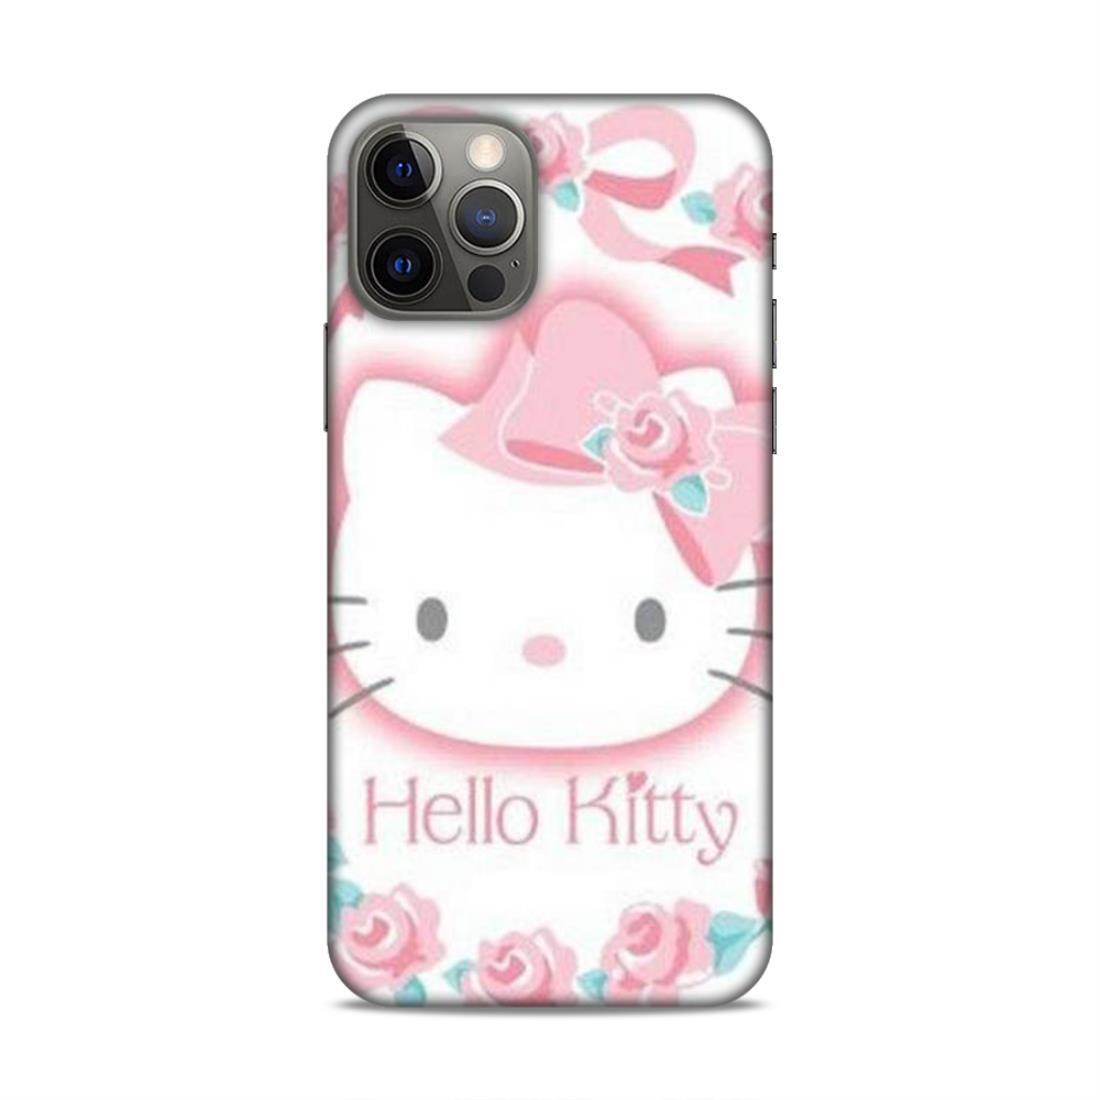 Hellow Kitty Pink iPhone 12 Pro Phone Cover Case